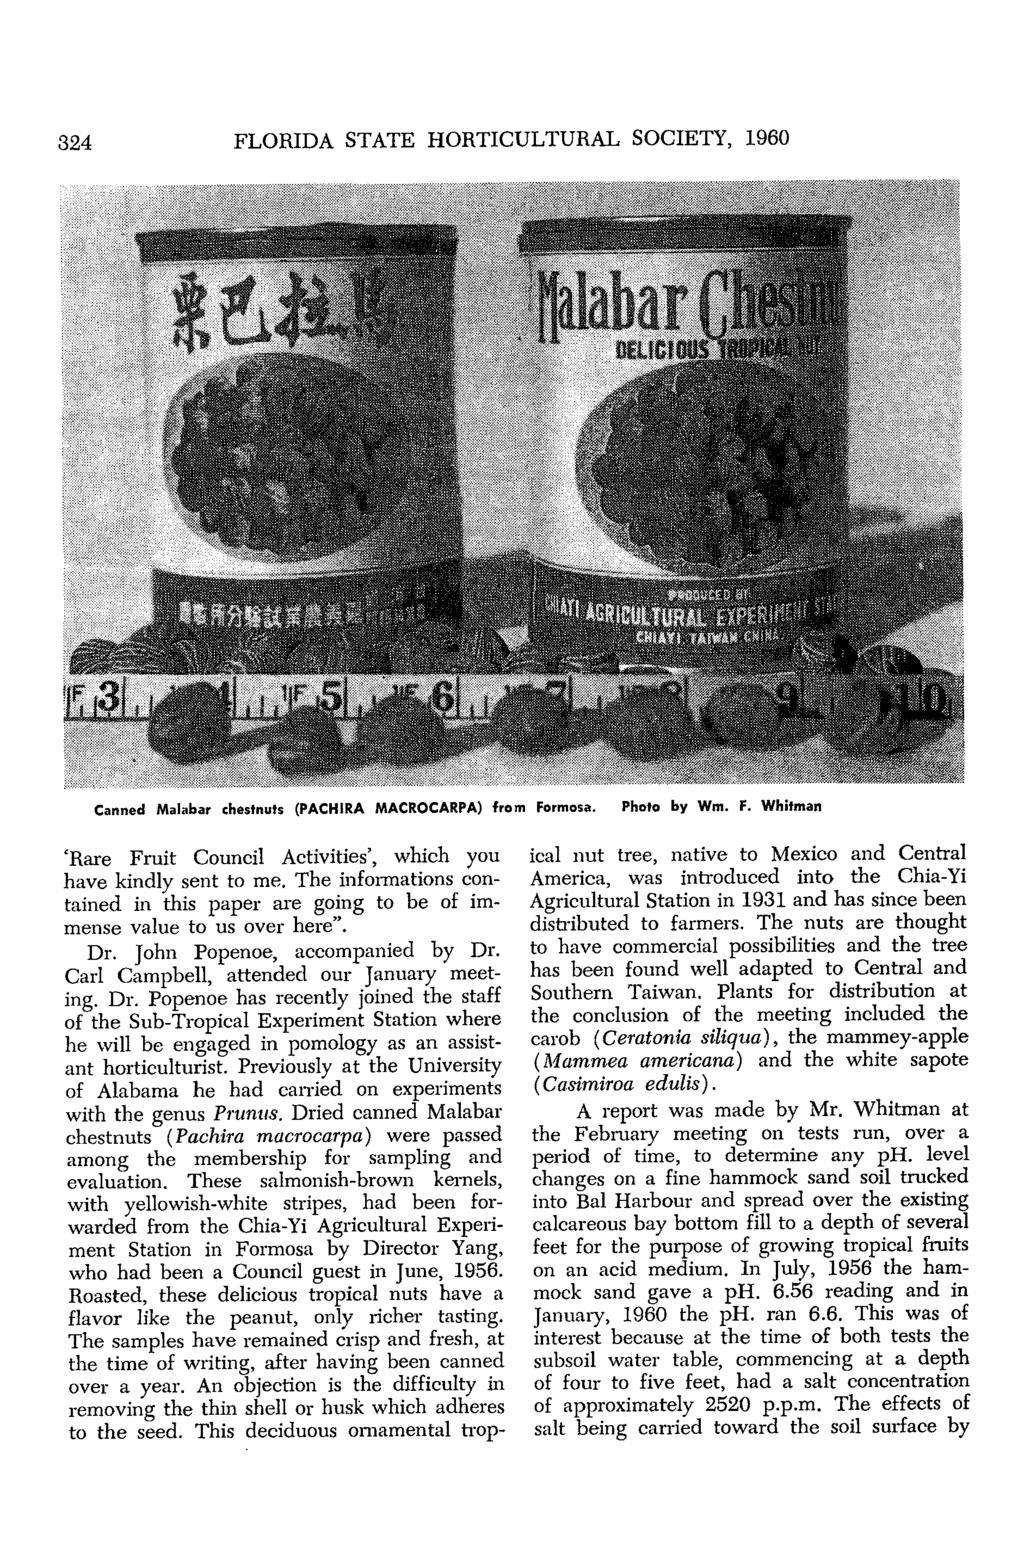 324 FLORIDA STATE HORTICULTURAL SOCIETY, 1960 Canned Malabar chestnuts (PACHIRA MACROCARPA) from Formosa. Photo by Wm. F. Whitman 'Rare Fruit Council Activities', which you have kindly sent to me.